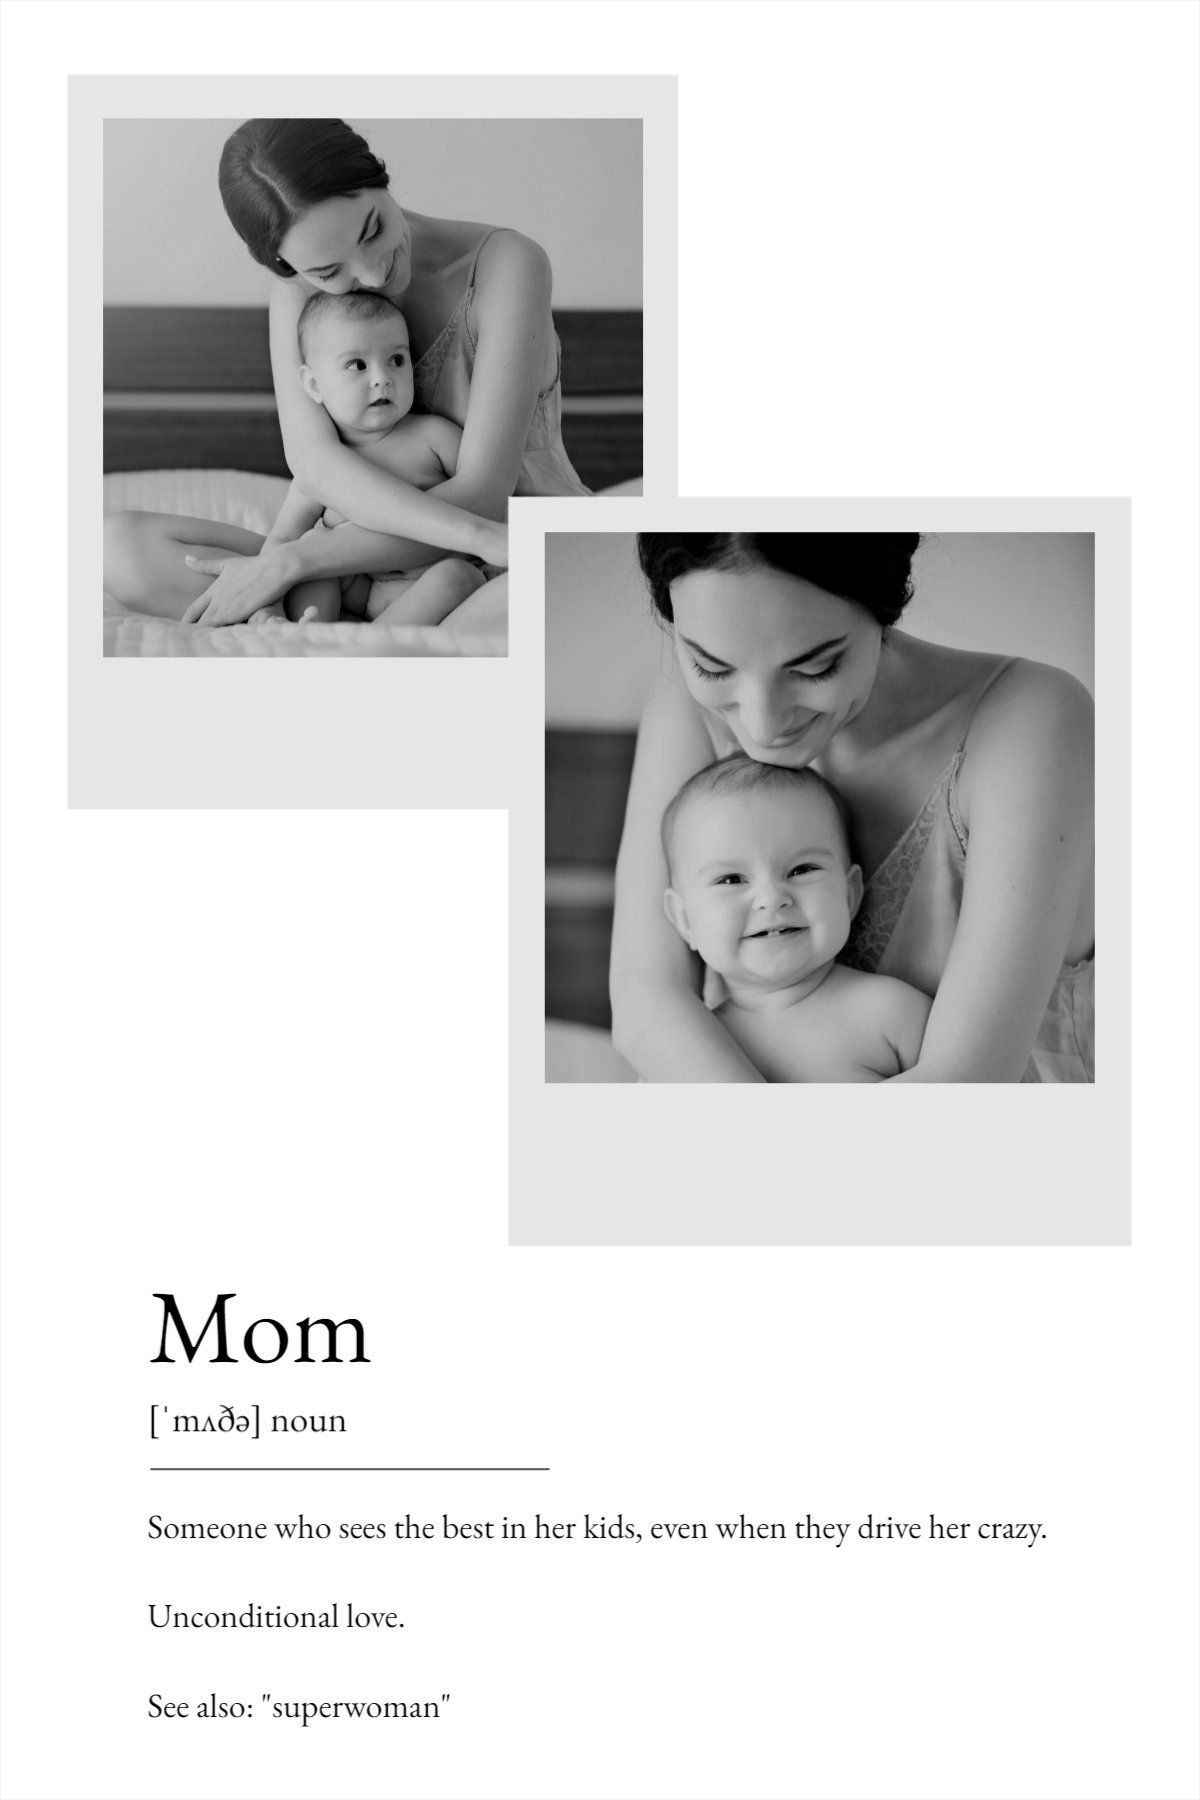 Happy Mom Day template design download for free